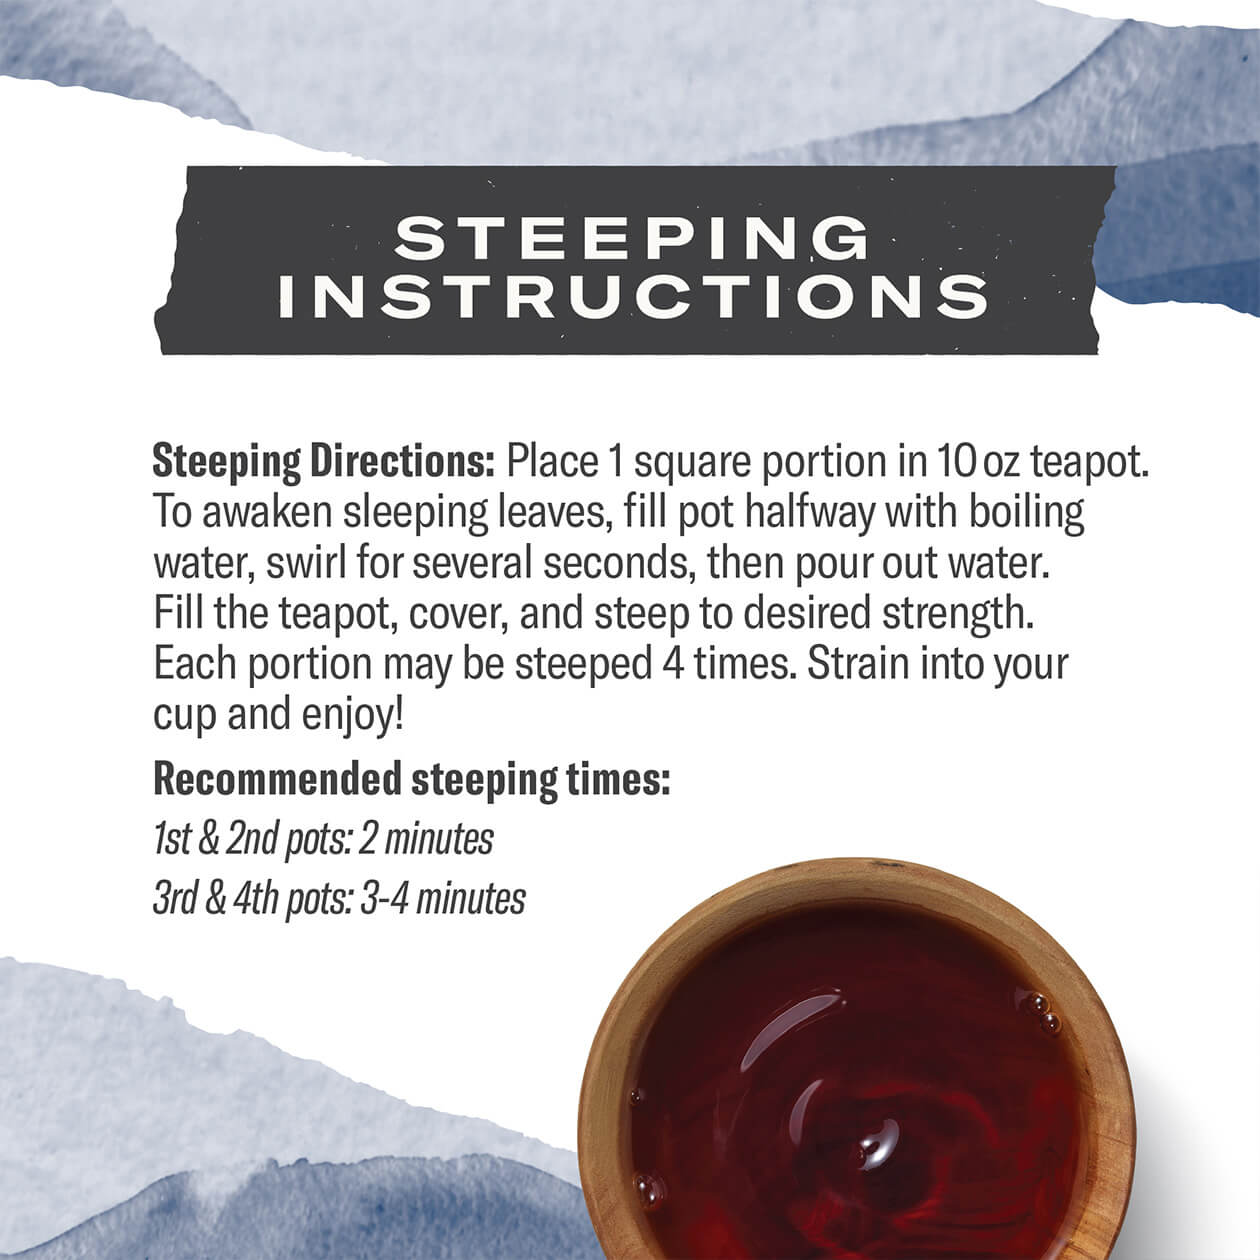 Steeping Instructions for a Puerh Tea Brick, steep pots 1 and 2 for 2 minutes, 3 & 4: 3-4 minutes